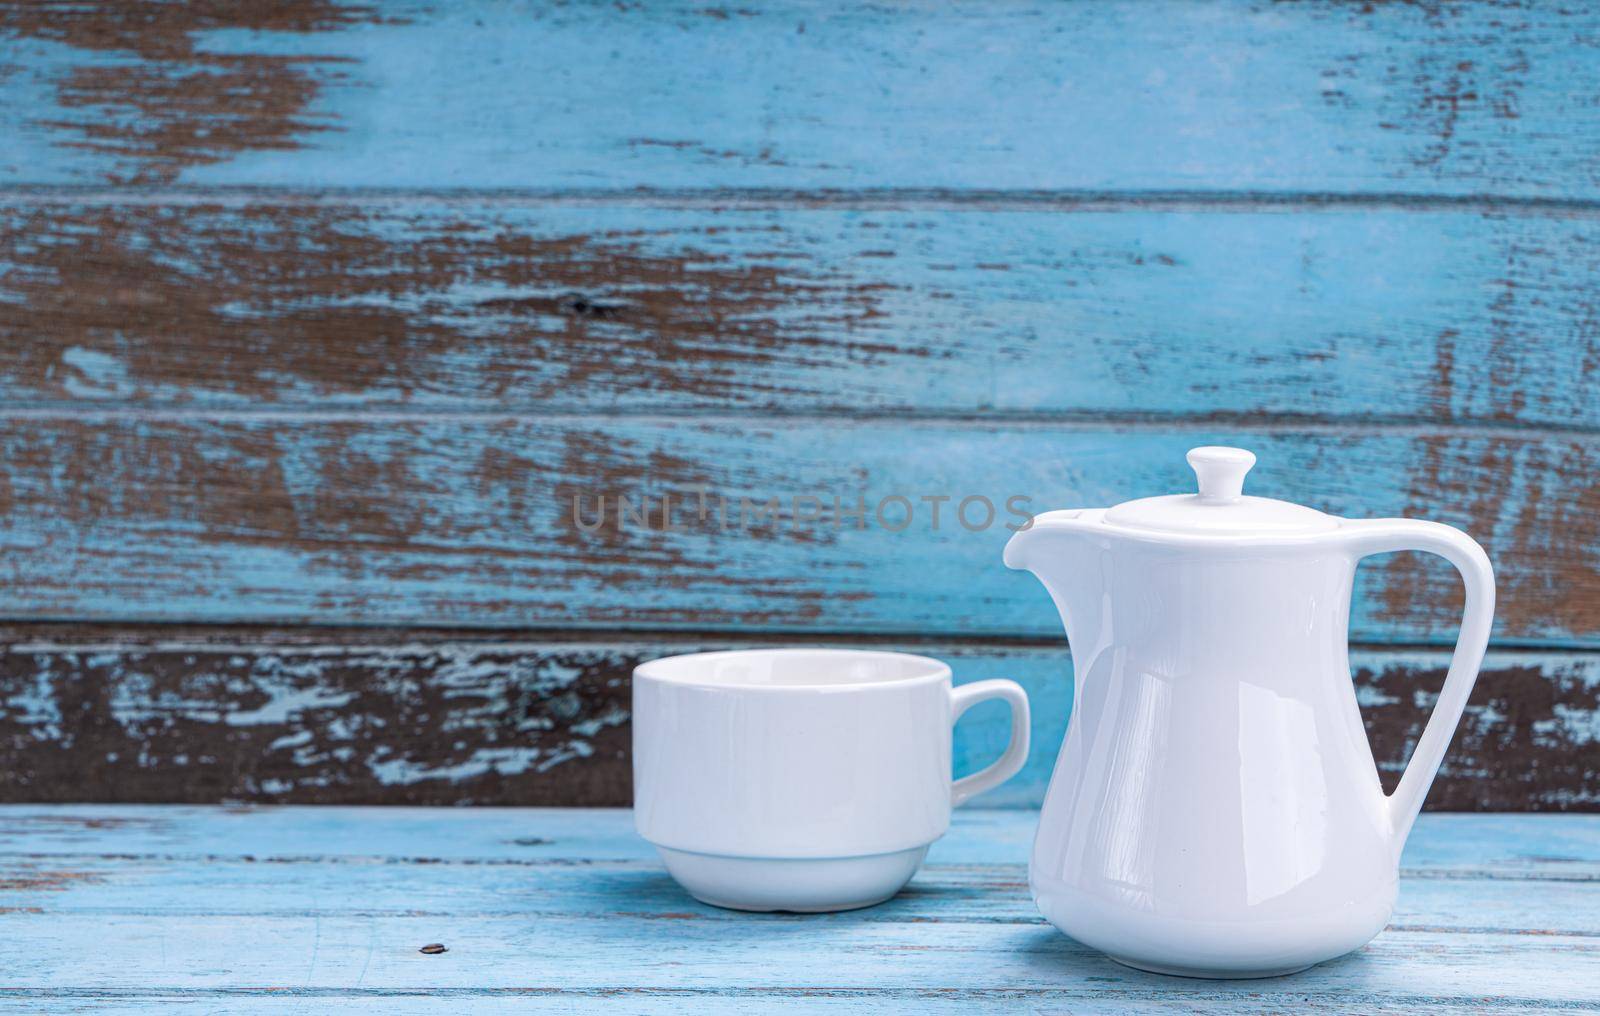 Set of white teacups on a blue wooden floor by Buttus_casso